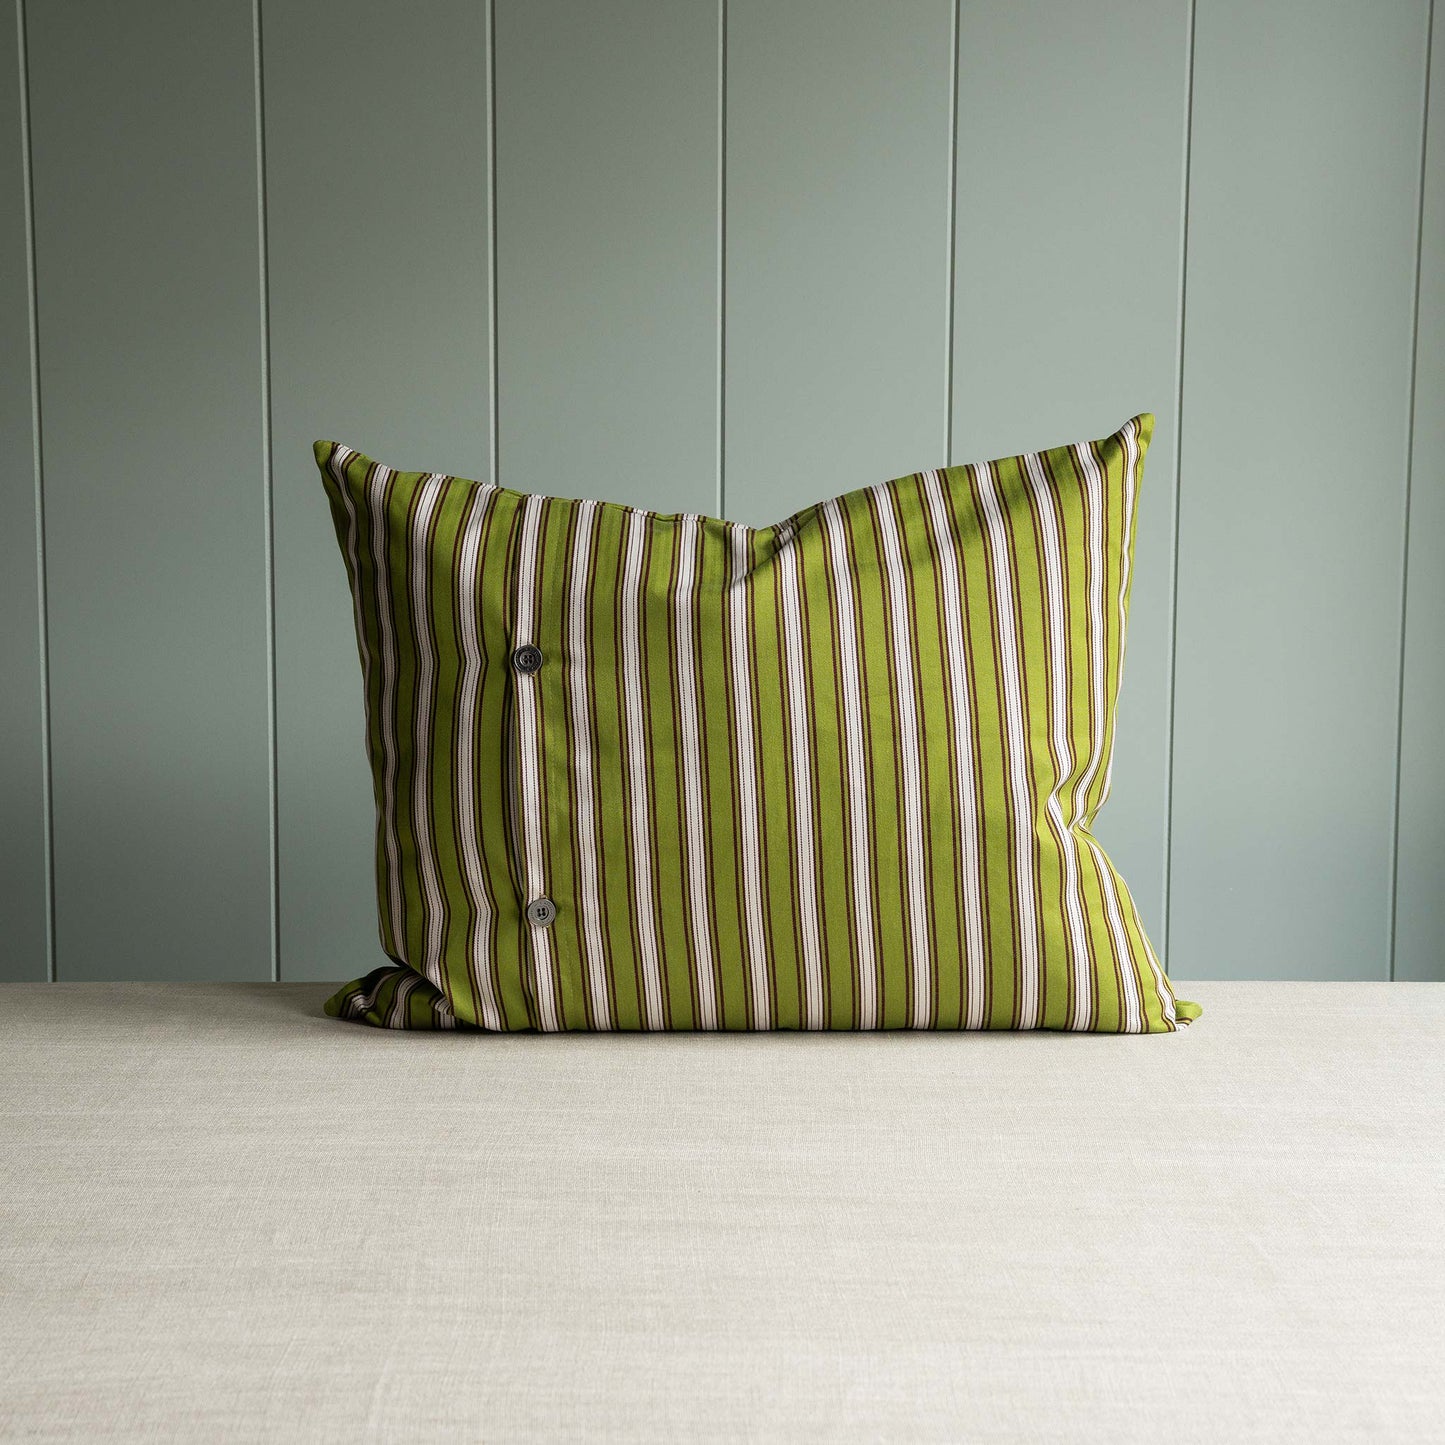 A green and white striped pillow on table.